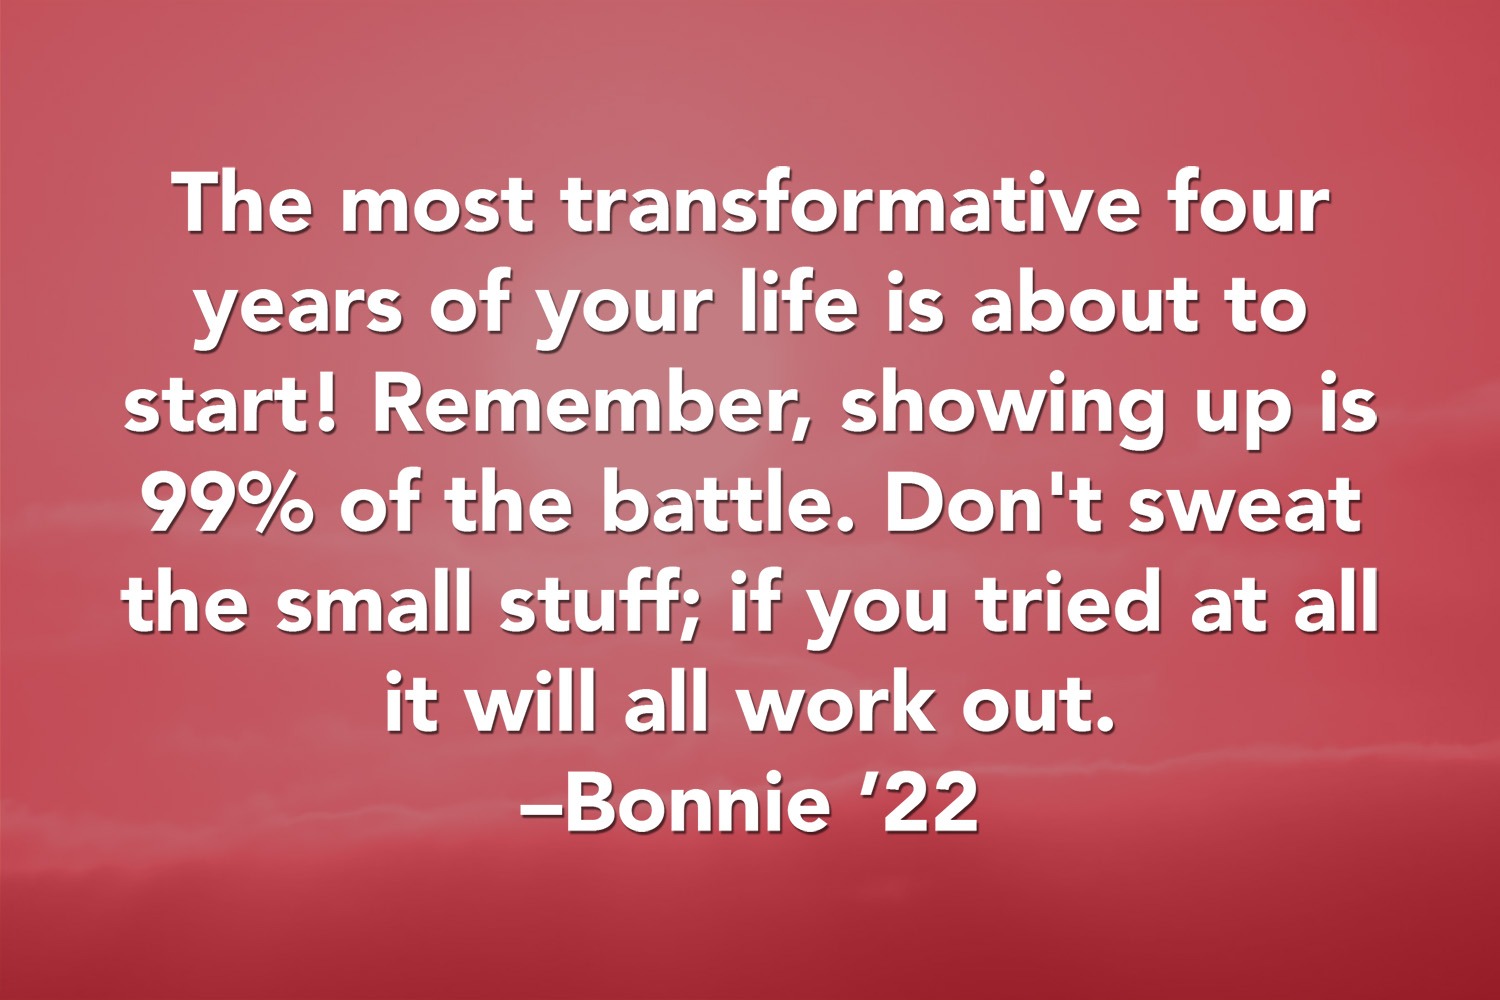 Quote: The most transformative four years of your life is about to start! Remember, showing up is 99% of the battle. Don't sweat the small stuff; if you tried at all it will all work out. 'Bonnie '22